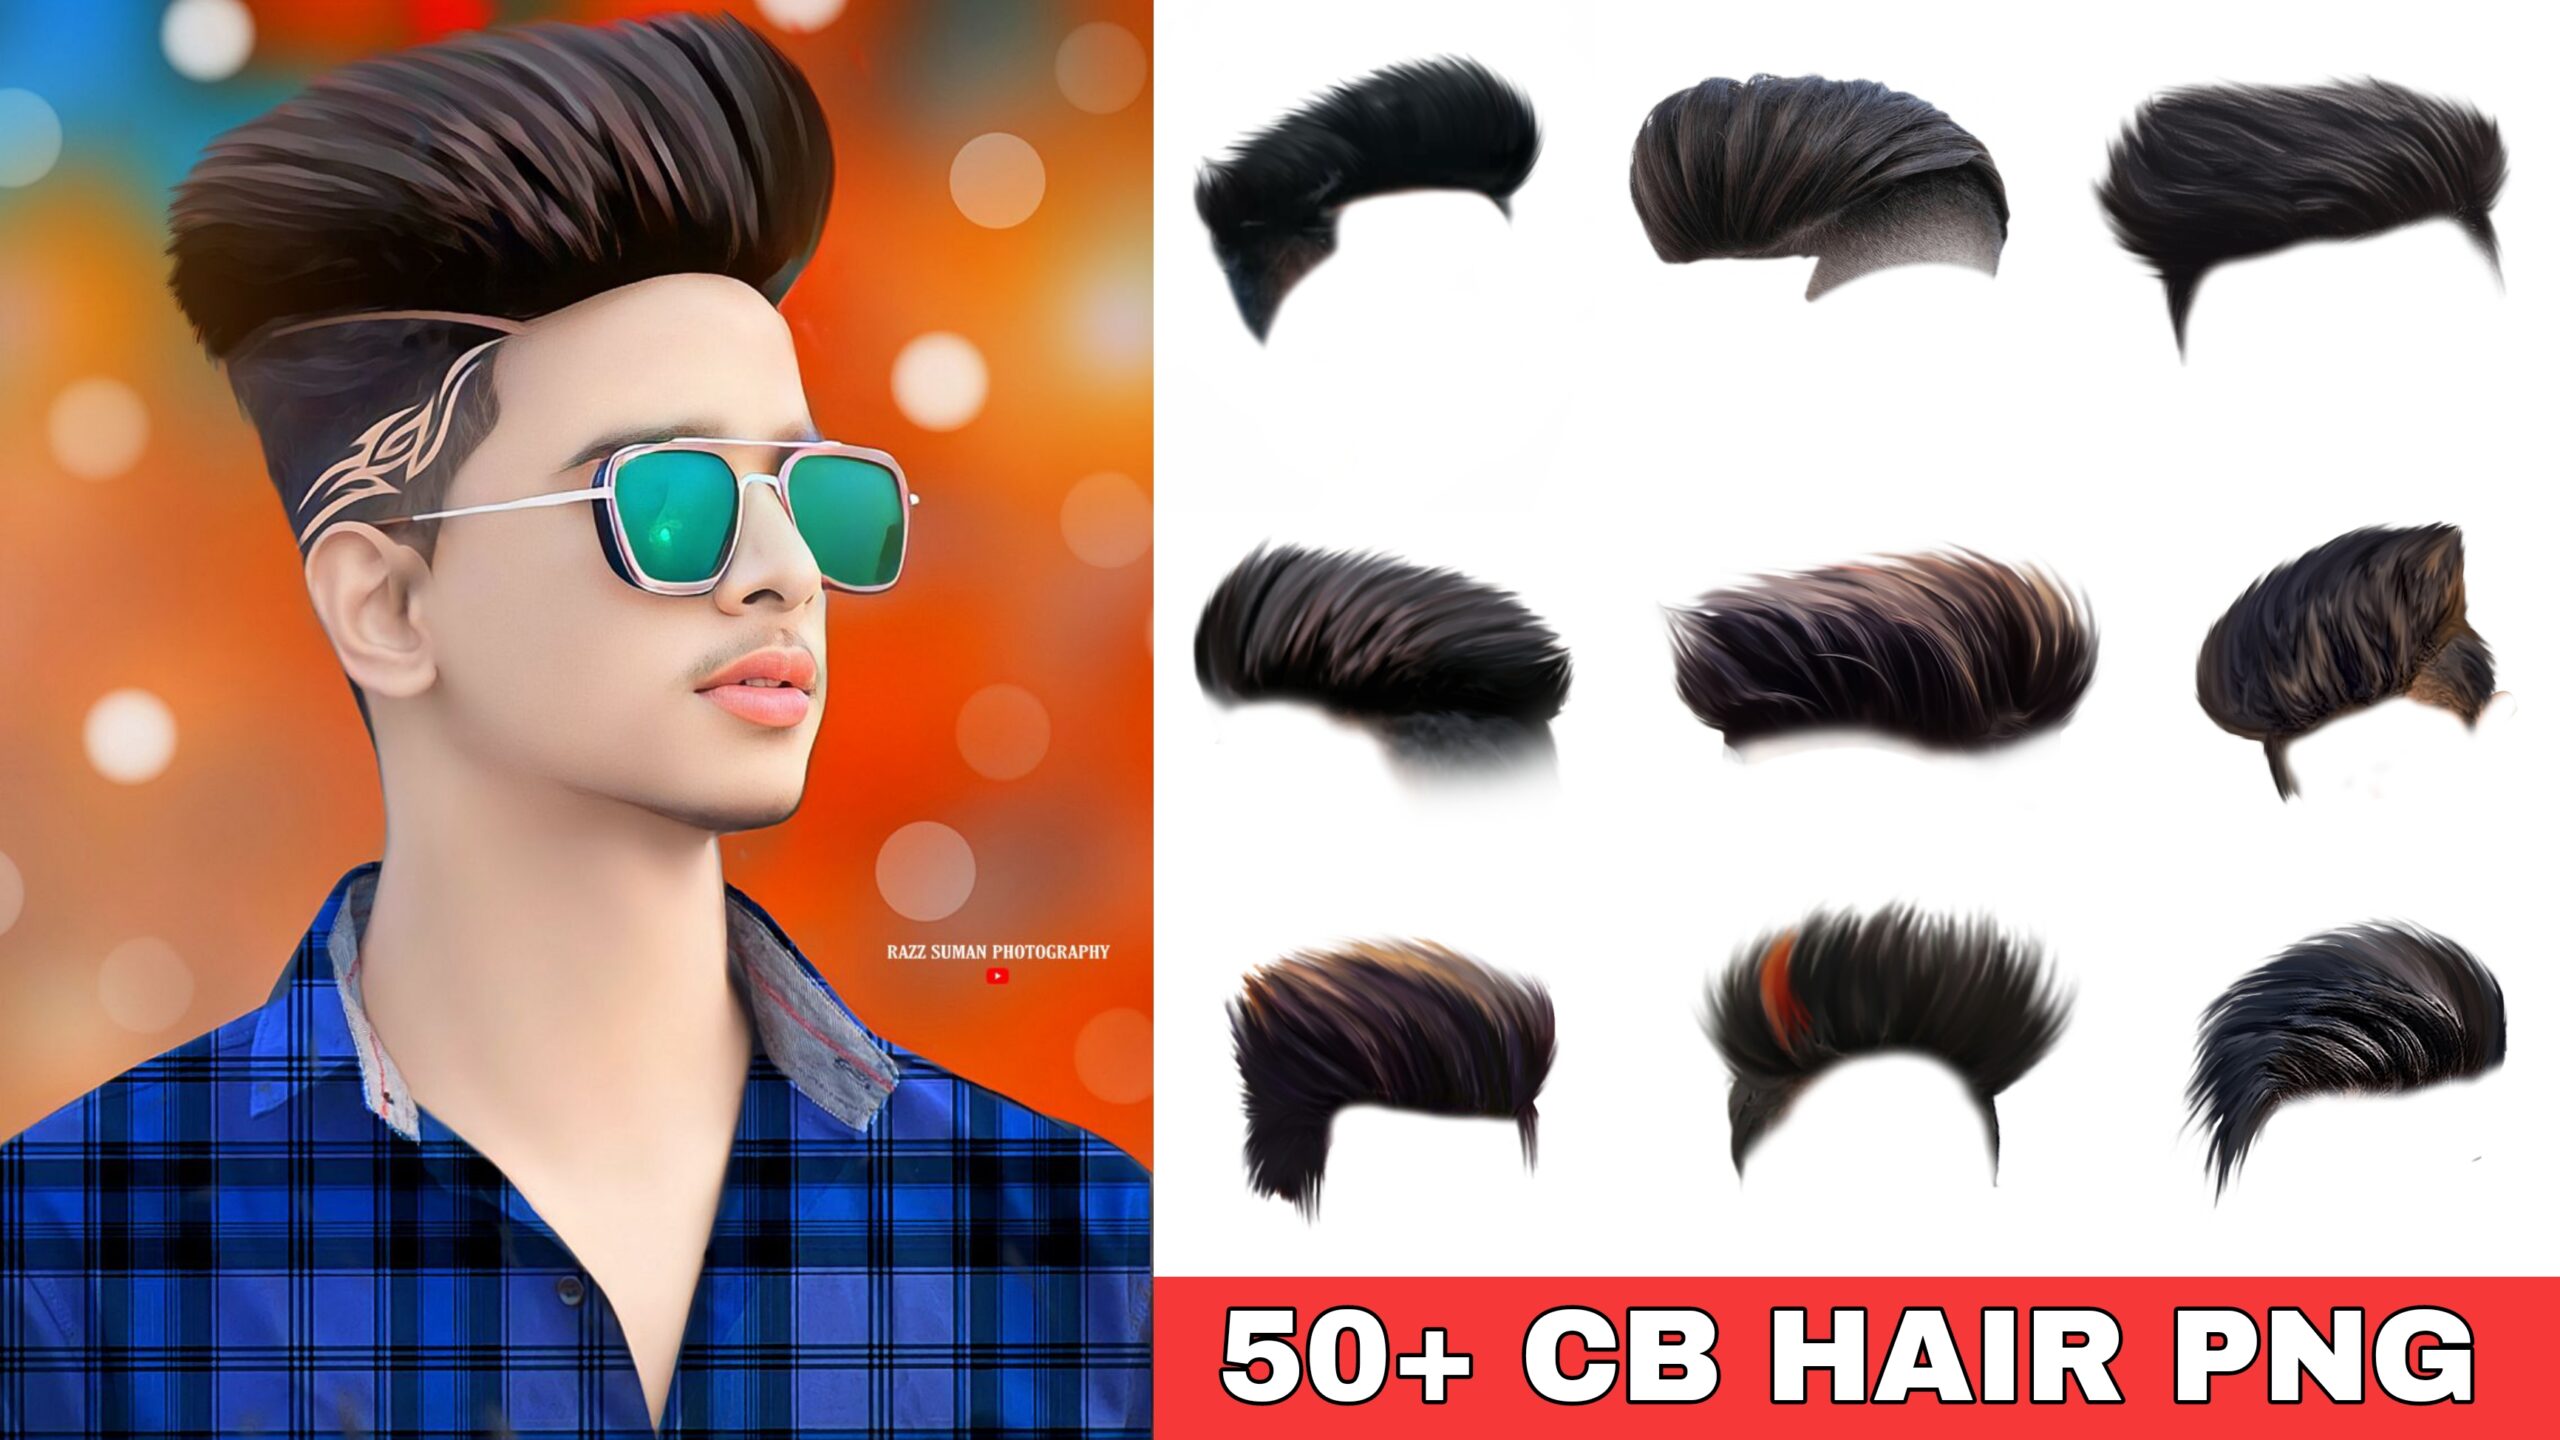 50+ Hair PNG For CB Editing Download Free - Razz Suman Photography